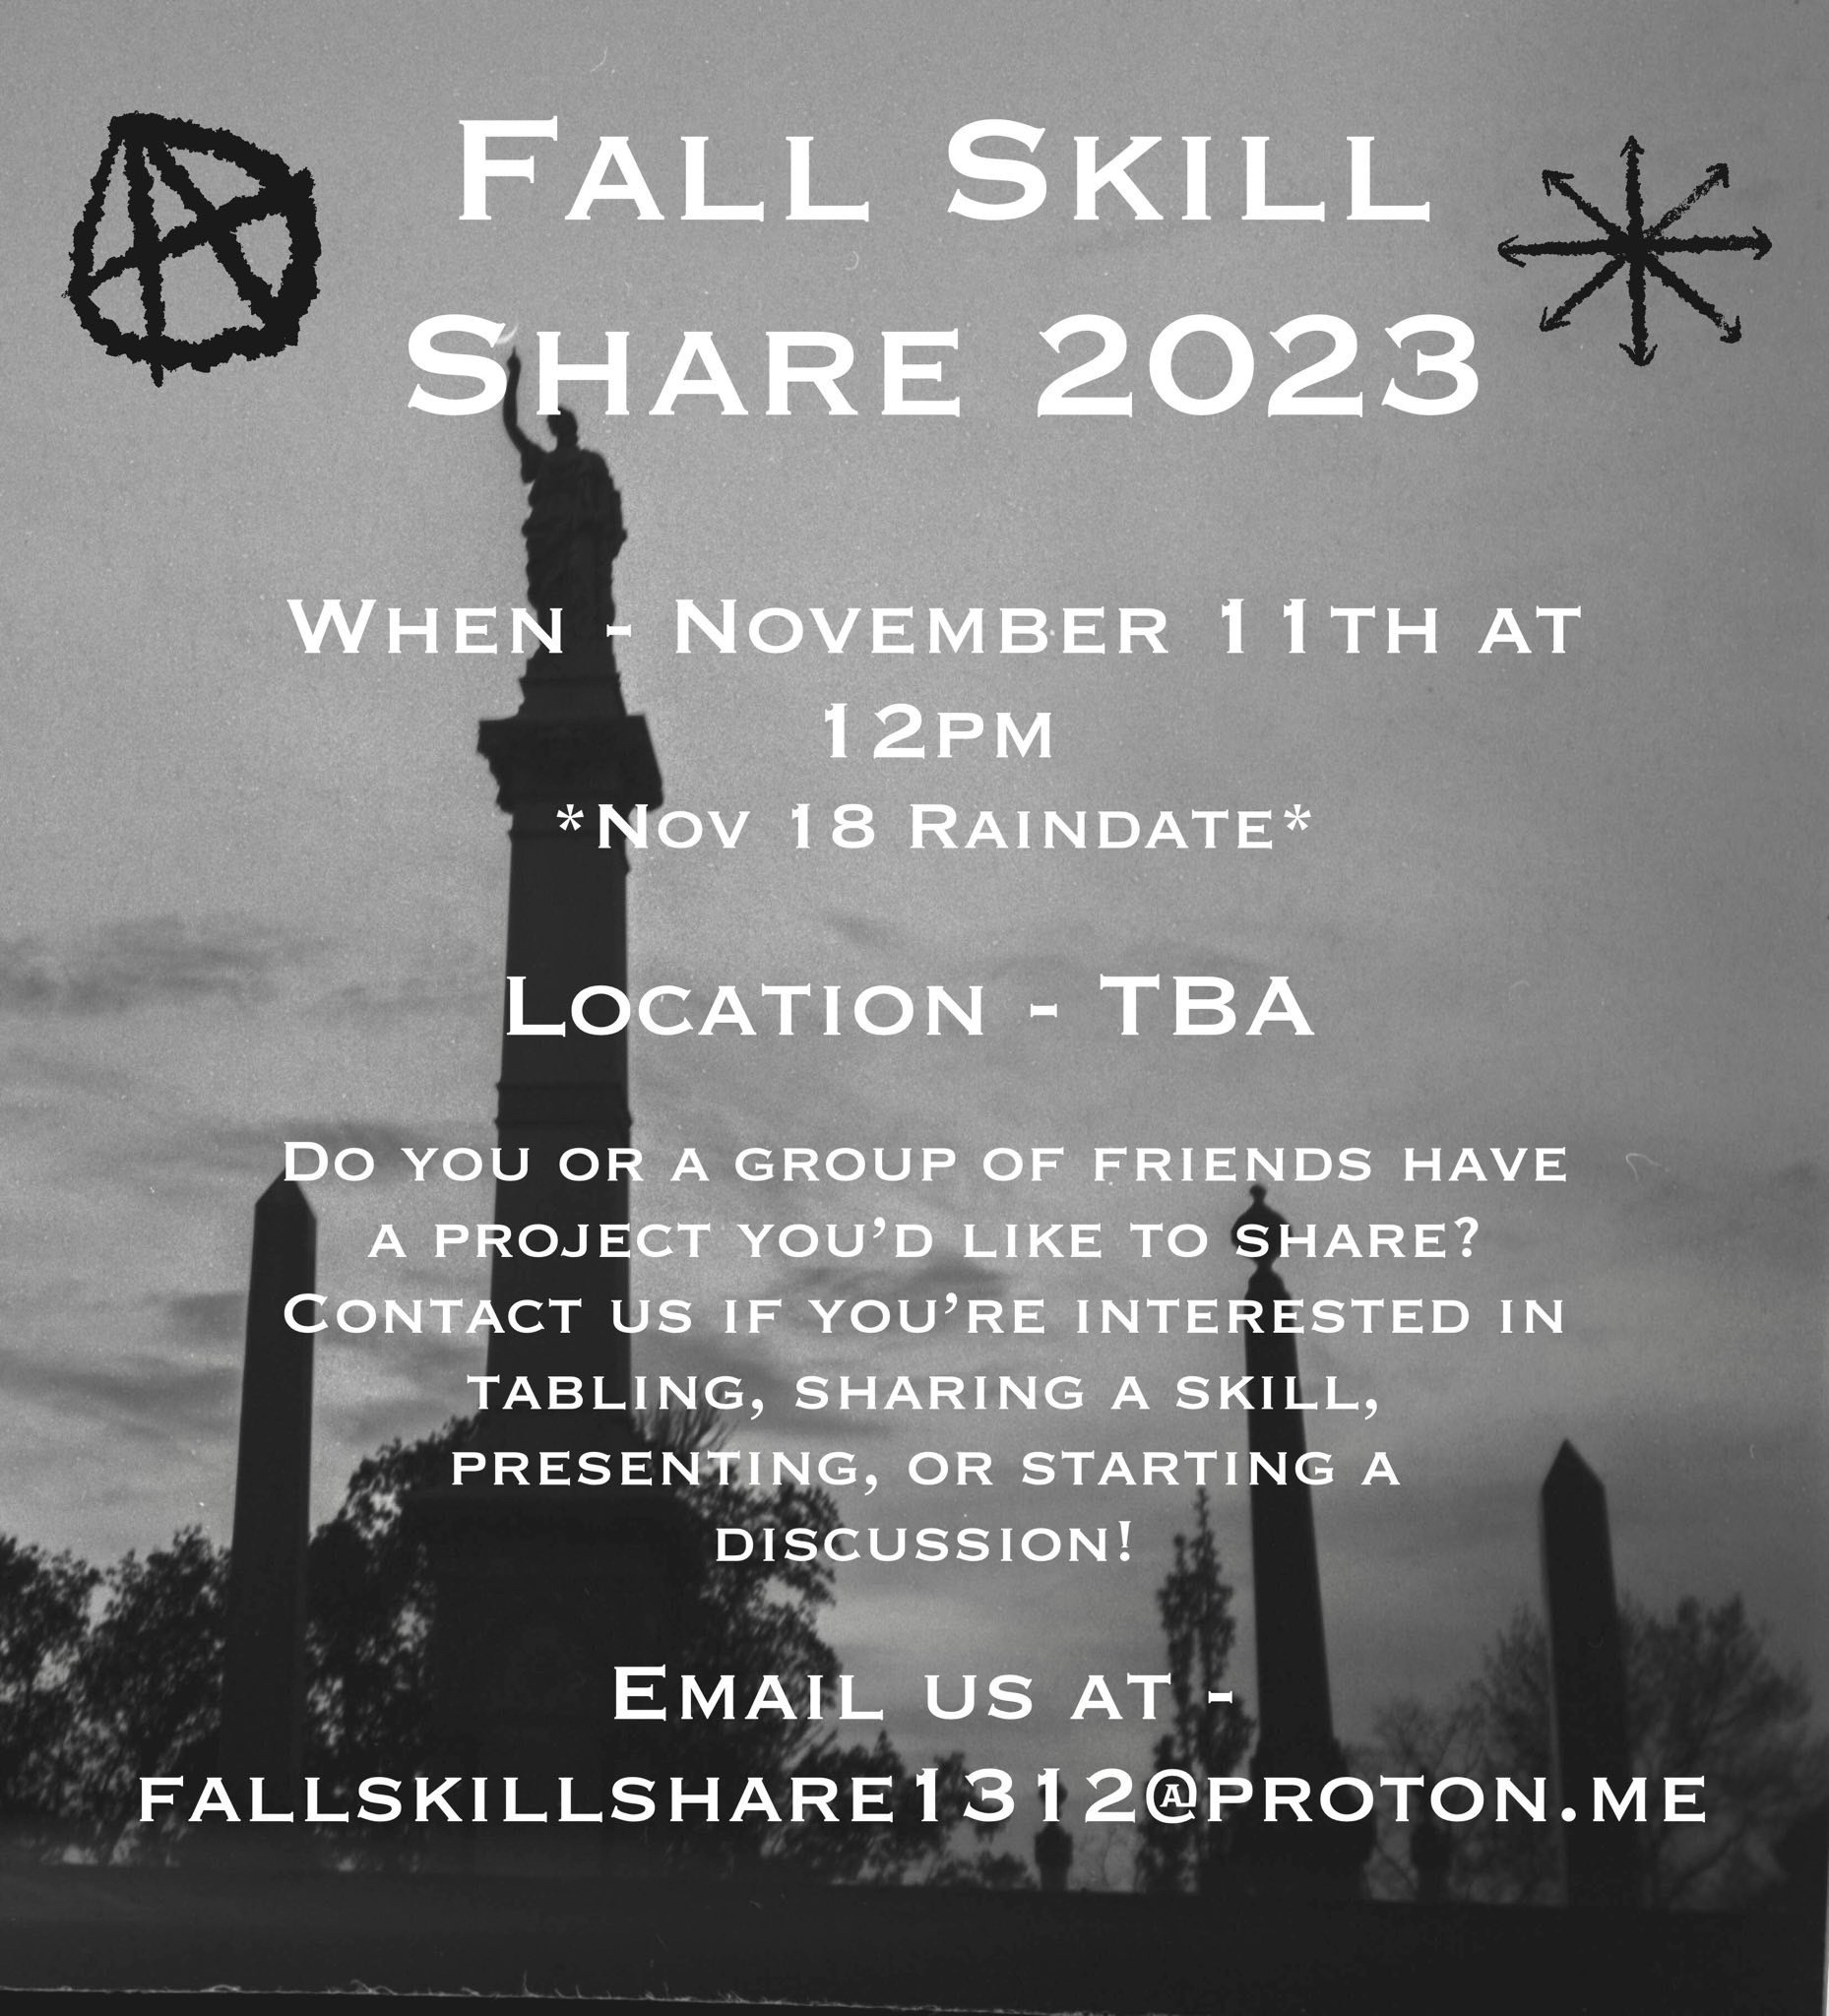 Flyer with a photo of graveyard monuments, a circle A anarchy symbol, and the following text: Fall Skill Share 2023 When - November 11th at 12PM *Nov 18 Raindate* Location - TBA Do you or a group of friends have a project you'd like to share? Contact us if you're interested in tabling, sharing a skill, presenting, or starting a discussion! Email us at - fallskillshare1312@proton.me